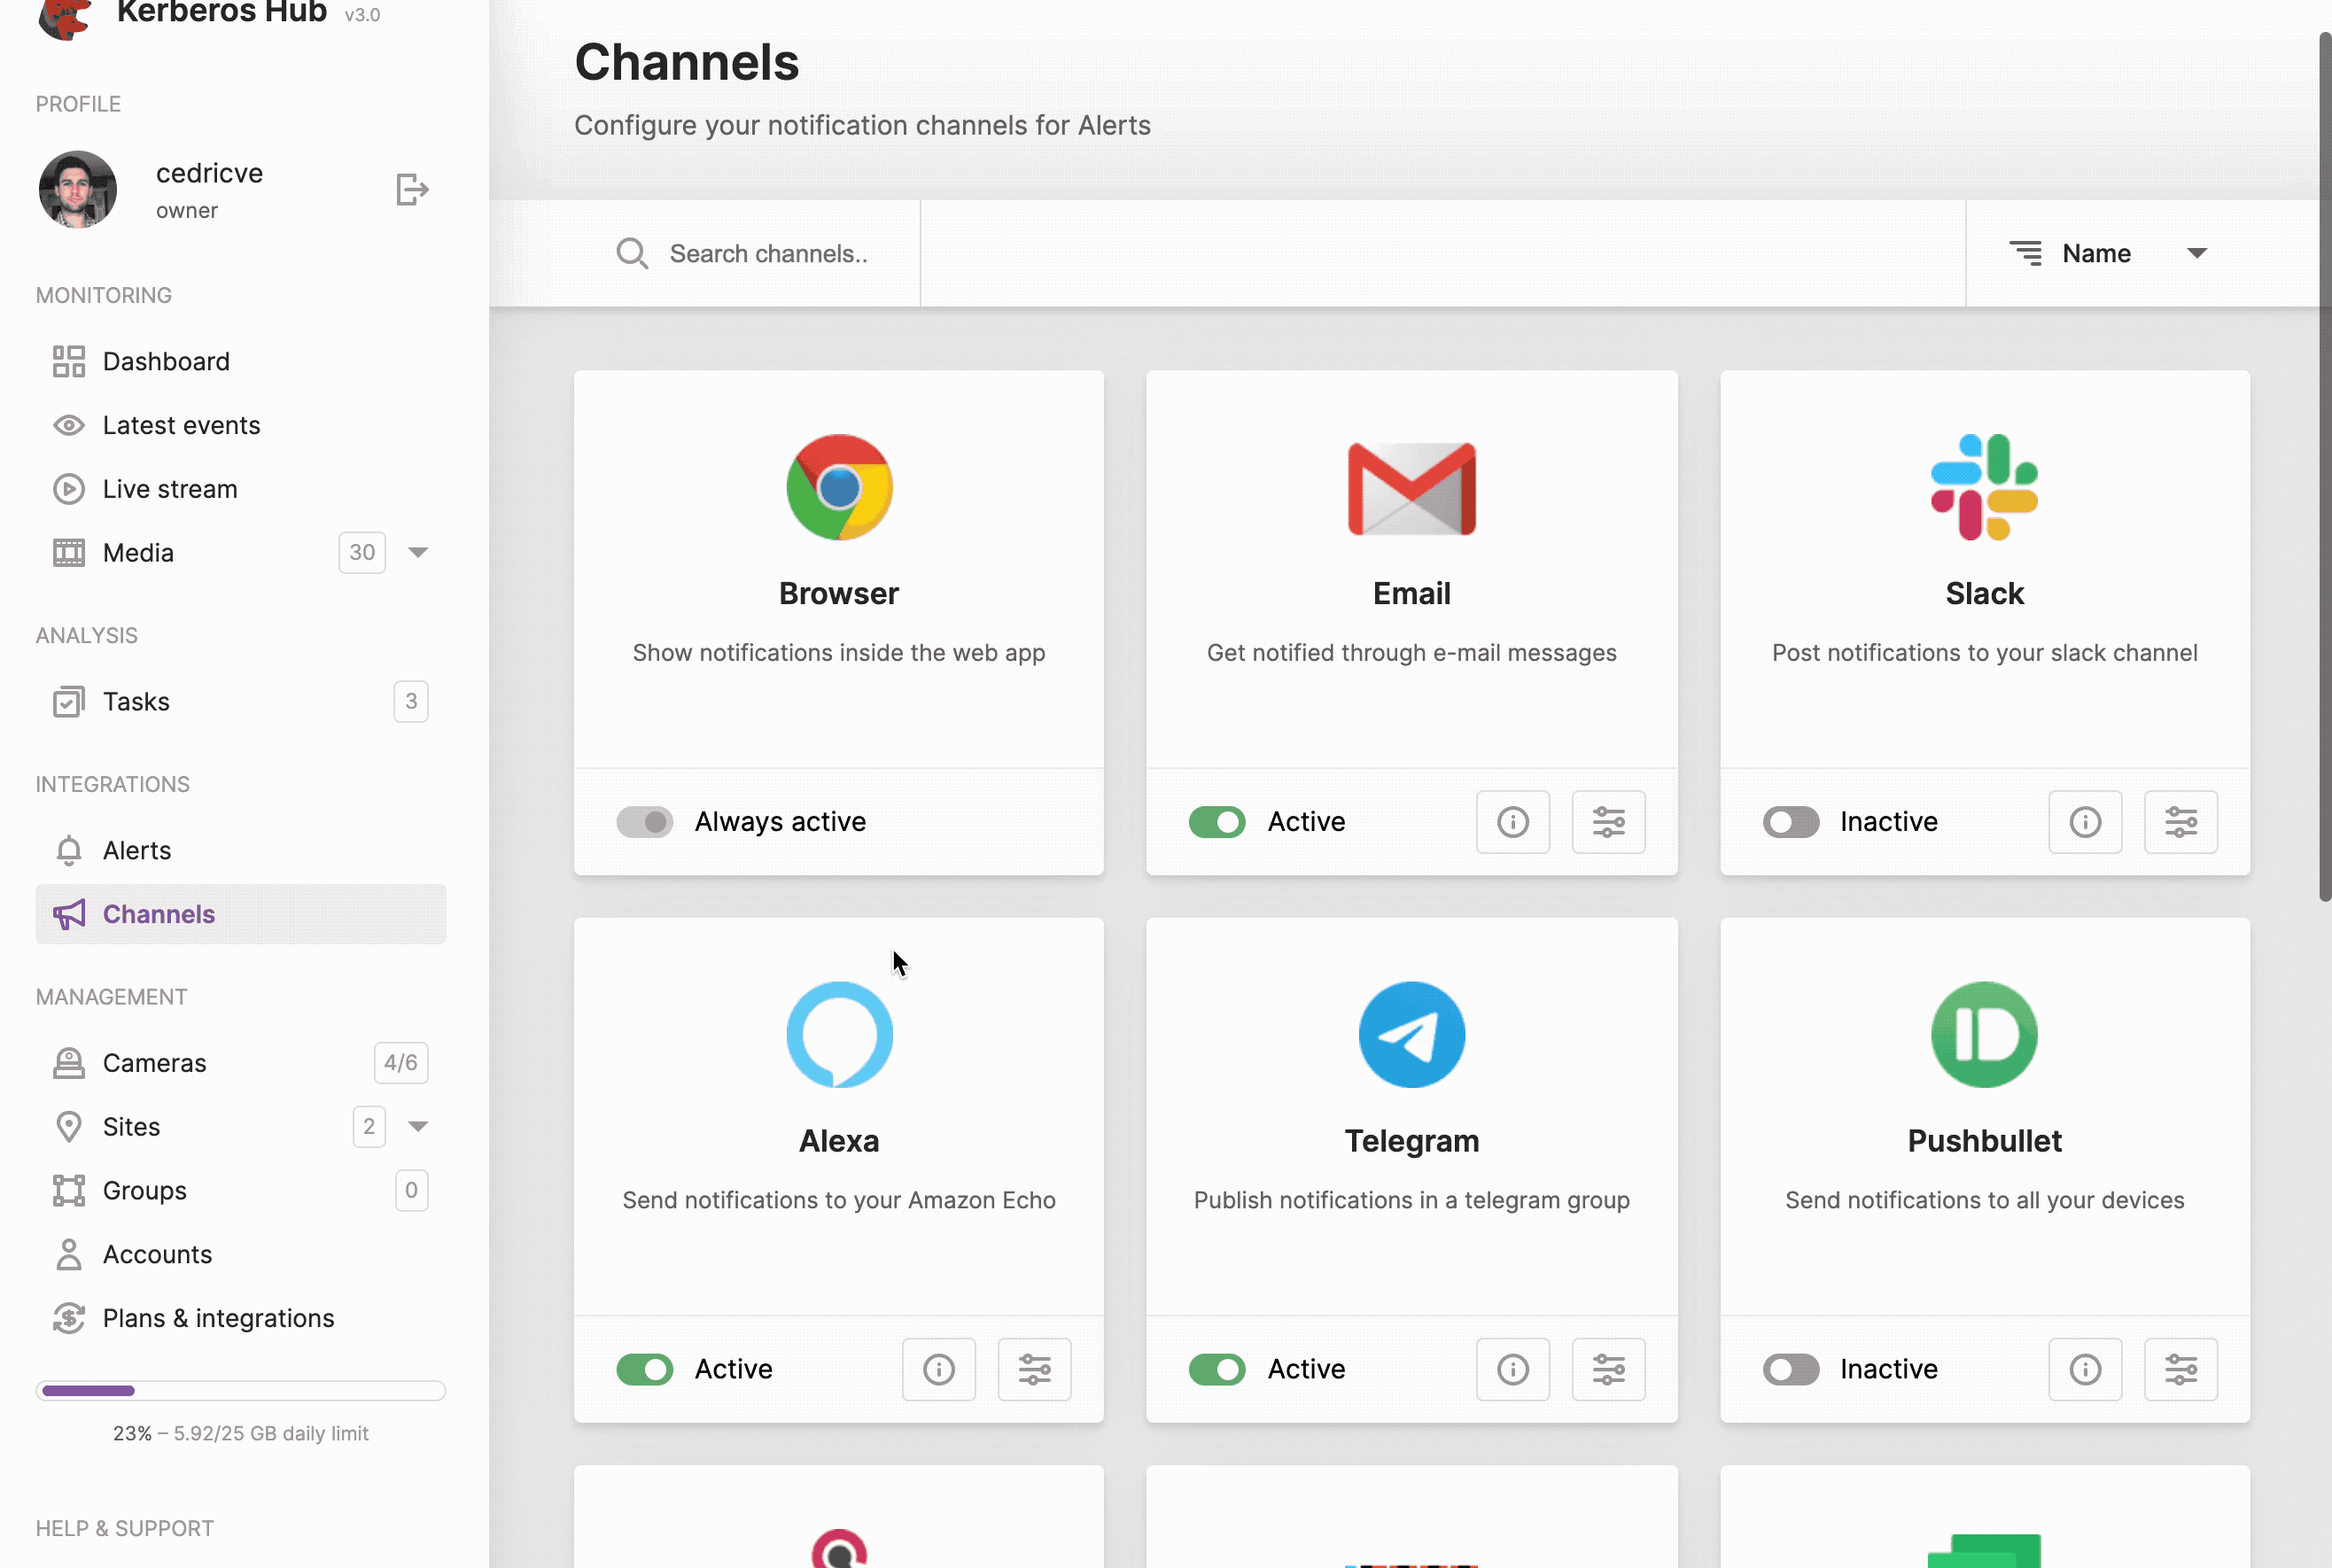 Channels allow you to communicate to external services.